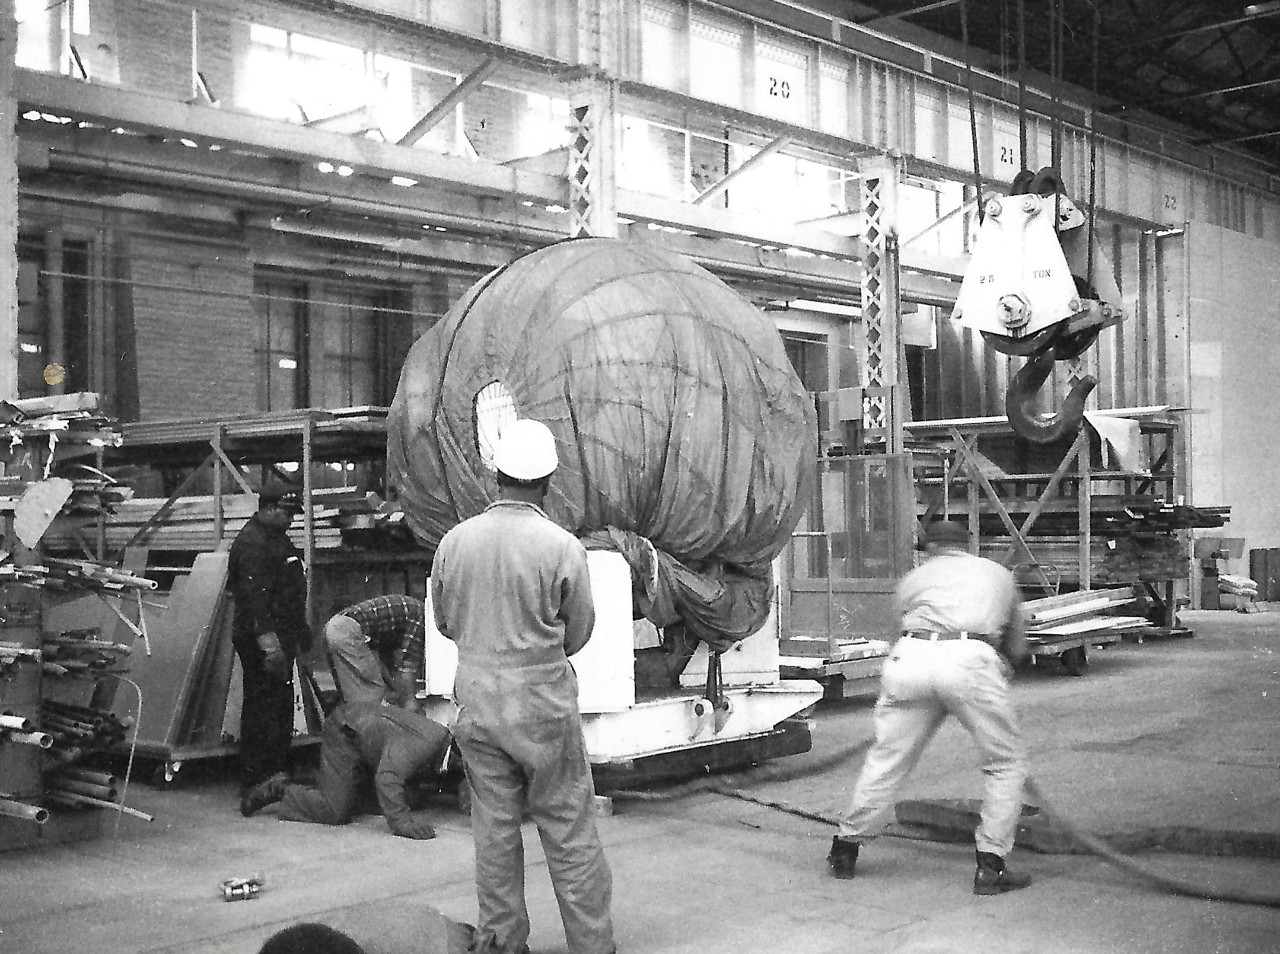 NMUSN-908:  Sphere to Bathyscaph Trieste, 1973.   The sphere to the Bathyscaph Trieste is being delivered to the Navy Memorial Museum, now National Museum of the U.S. Navy, on March 30, 1973.   This area is where the Exhibit Work Shop area now resides.  National Museum of the U.S. Navy Photograph Collection.   